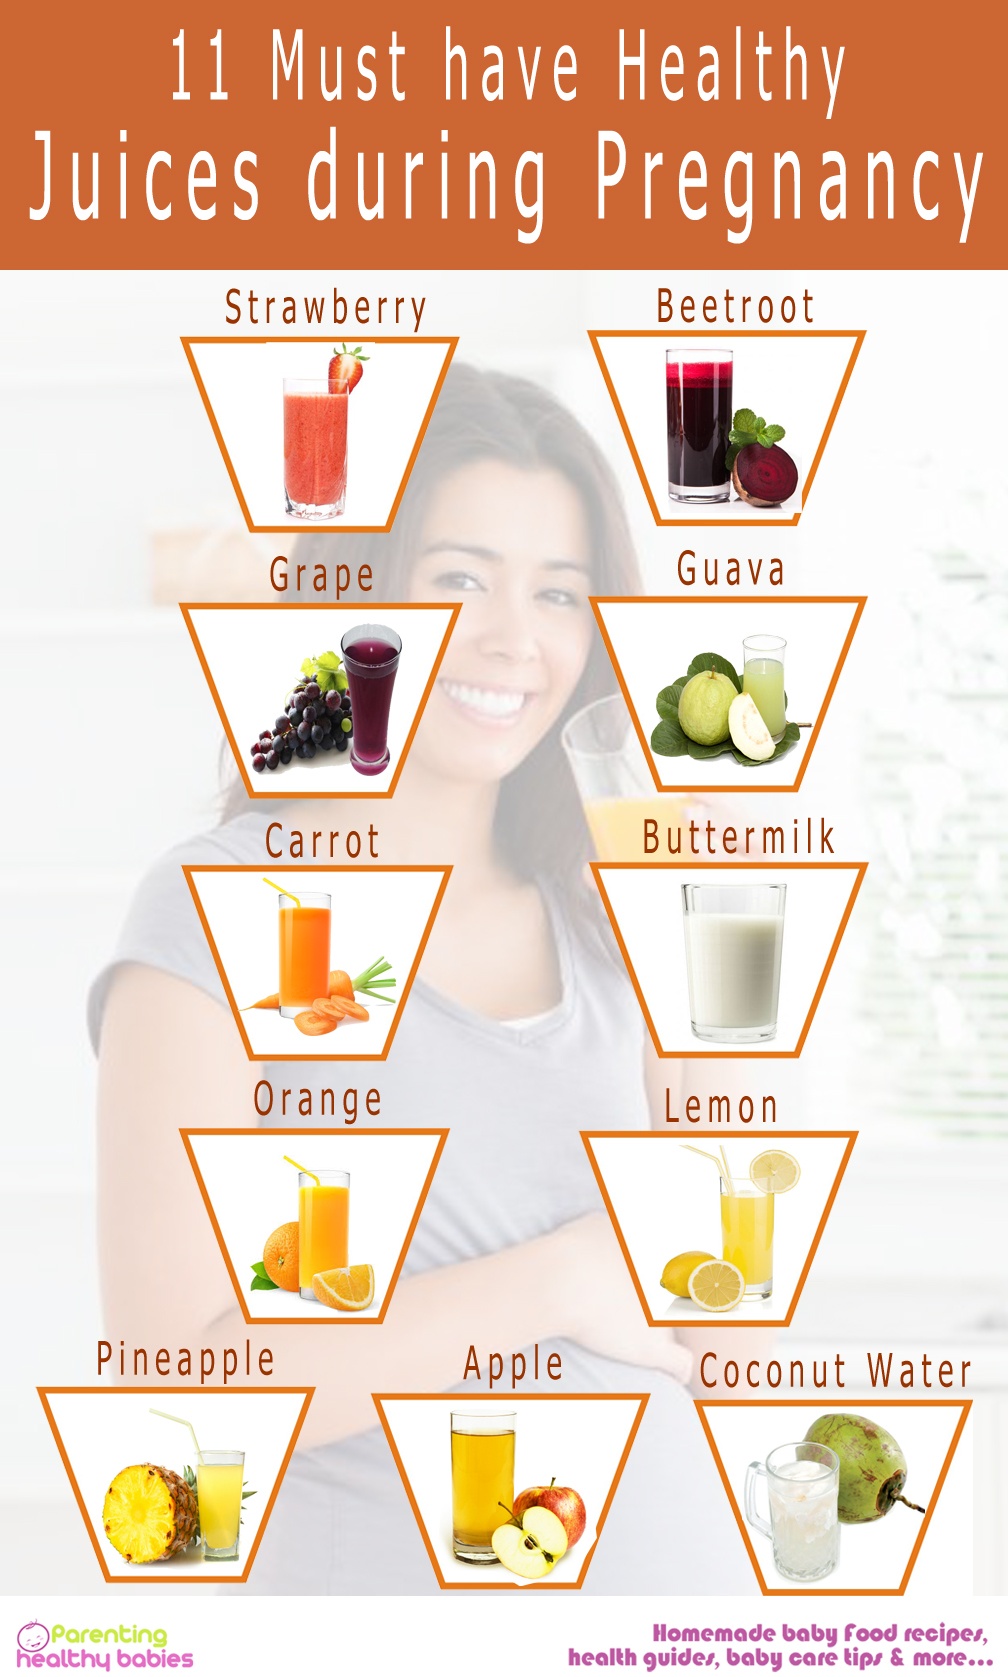 11 must have healthy juices during pregnancy